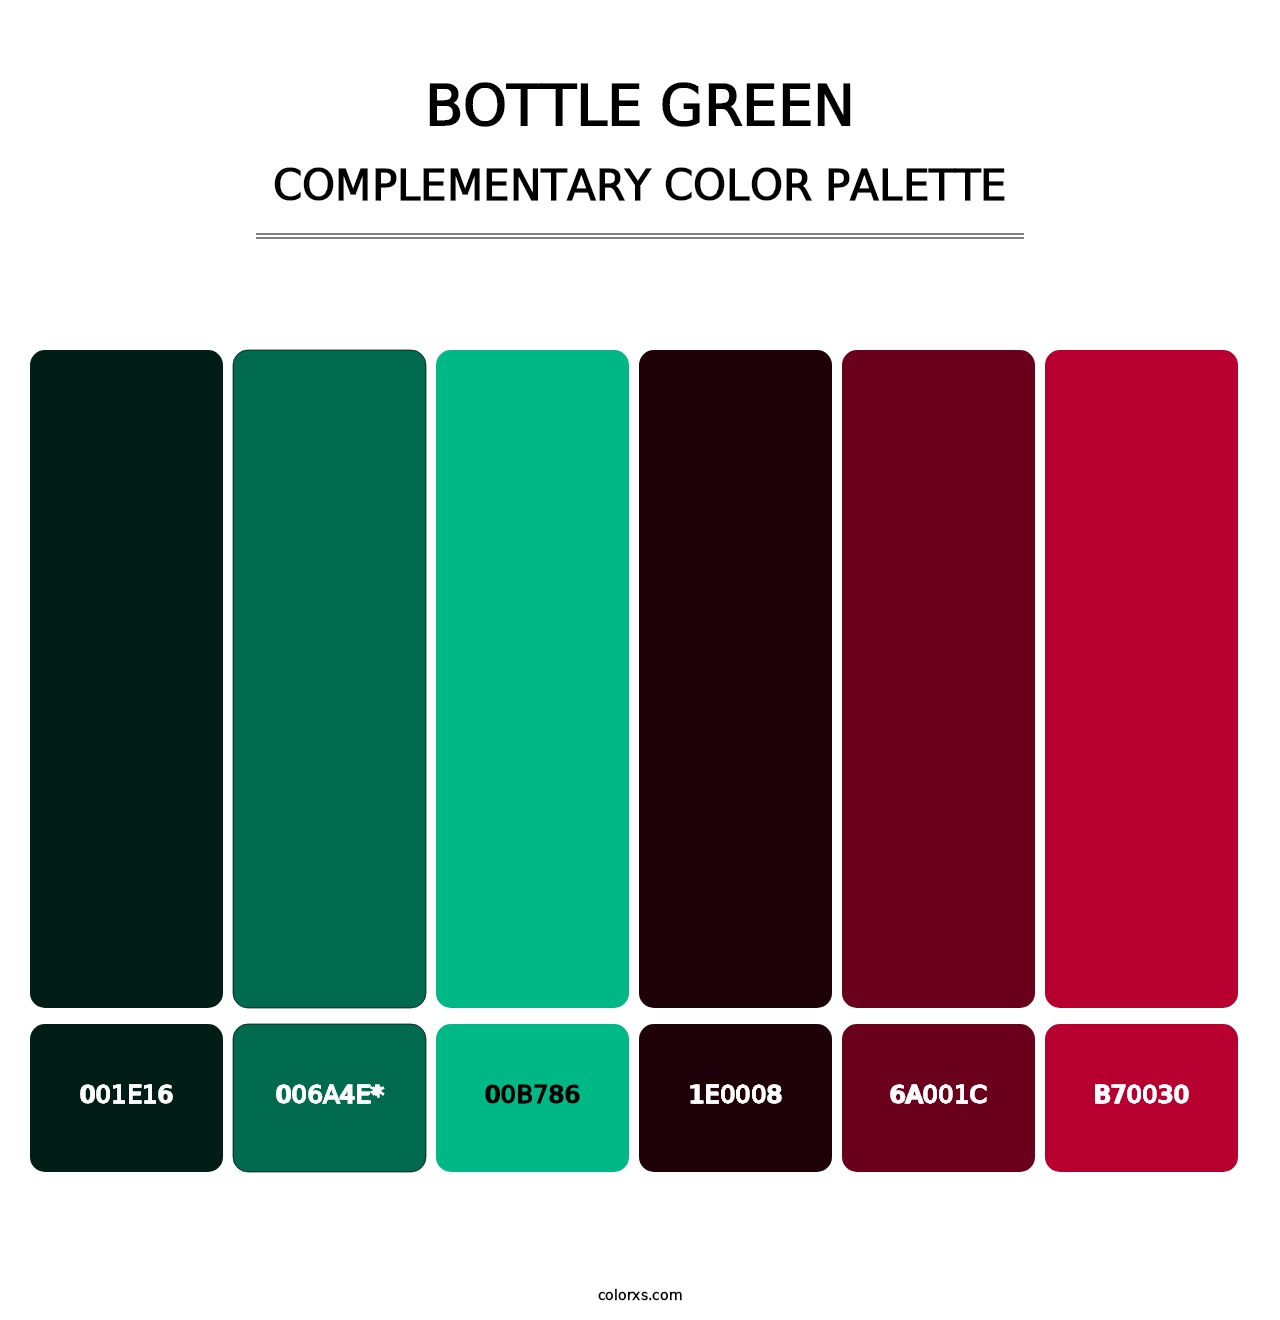 Bottle Green - Complementary Color Palette